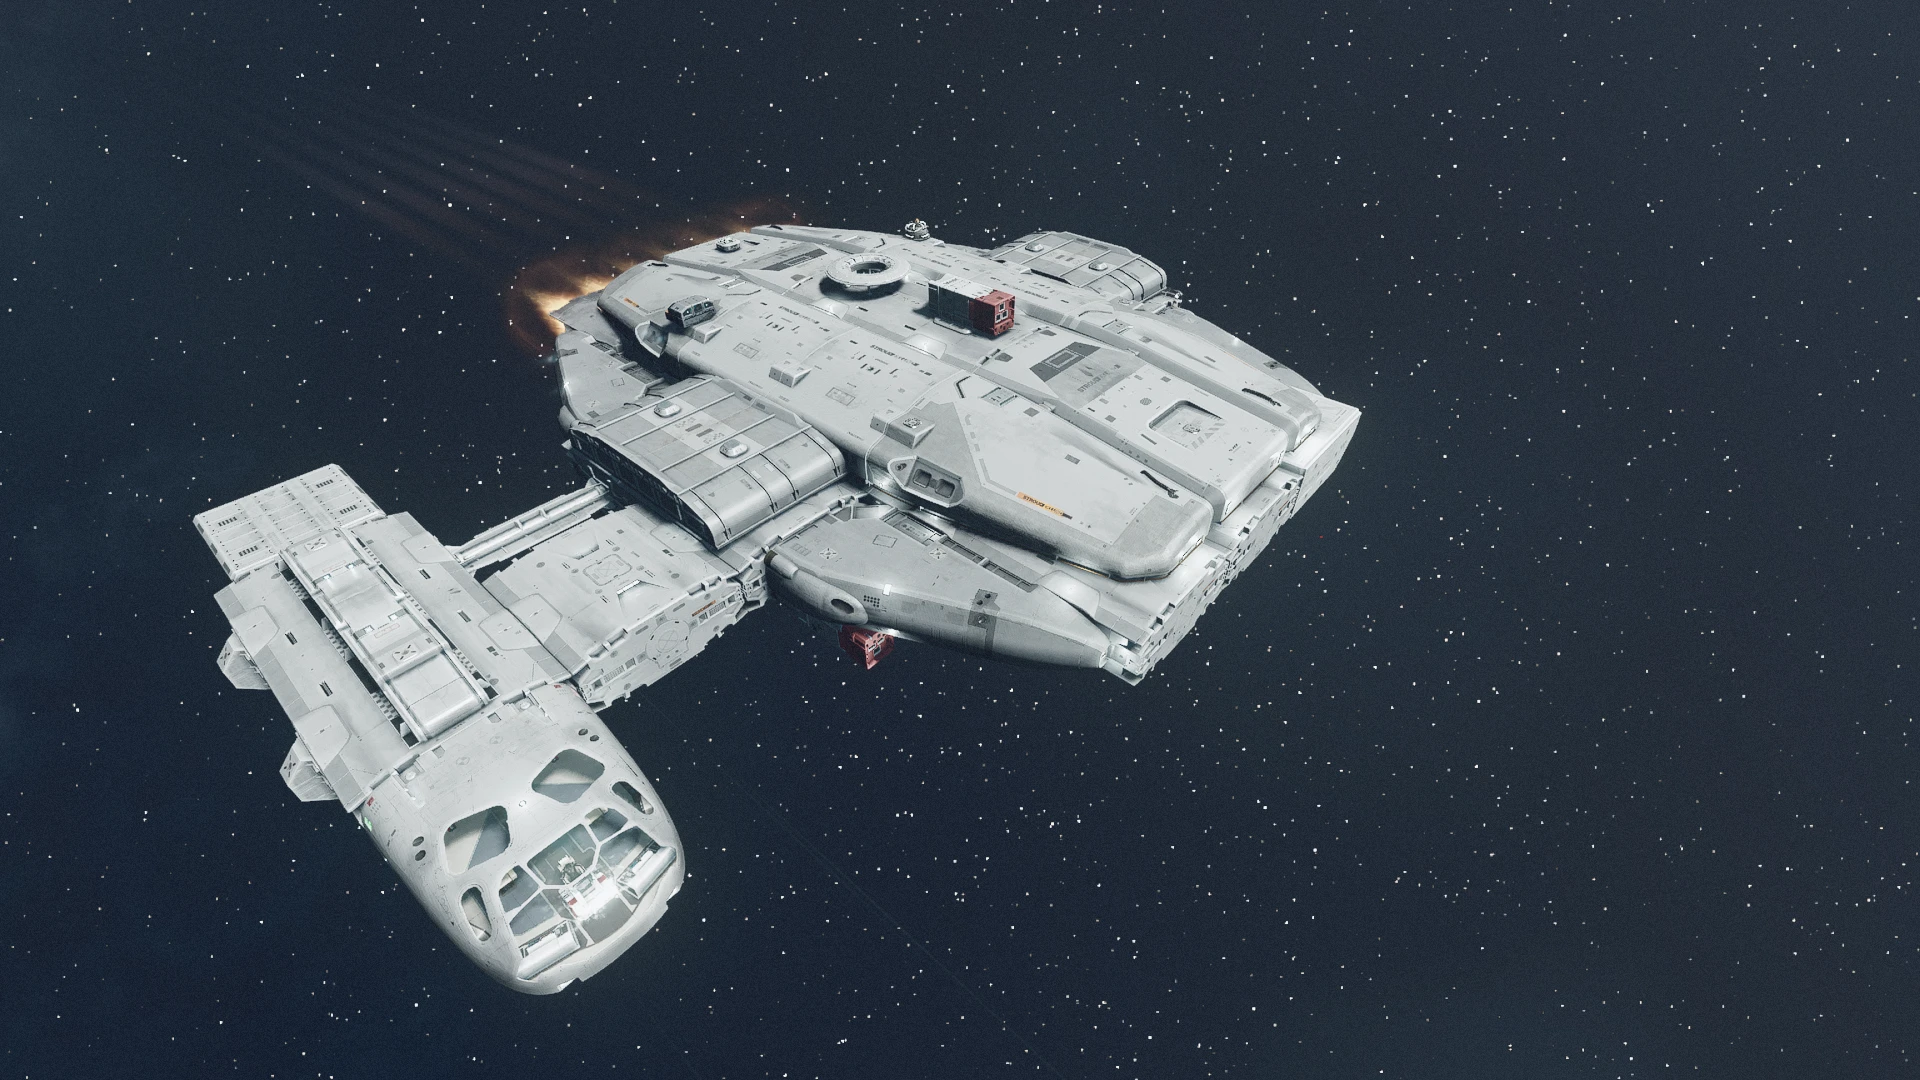 Dash Rendar's Outrider from Star Wars at Starfield Nexus - Mods and ...